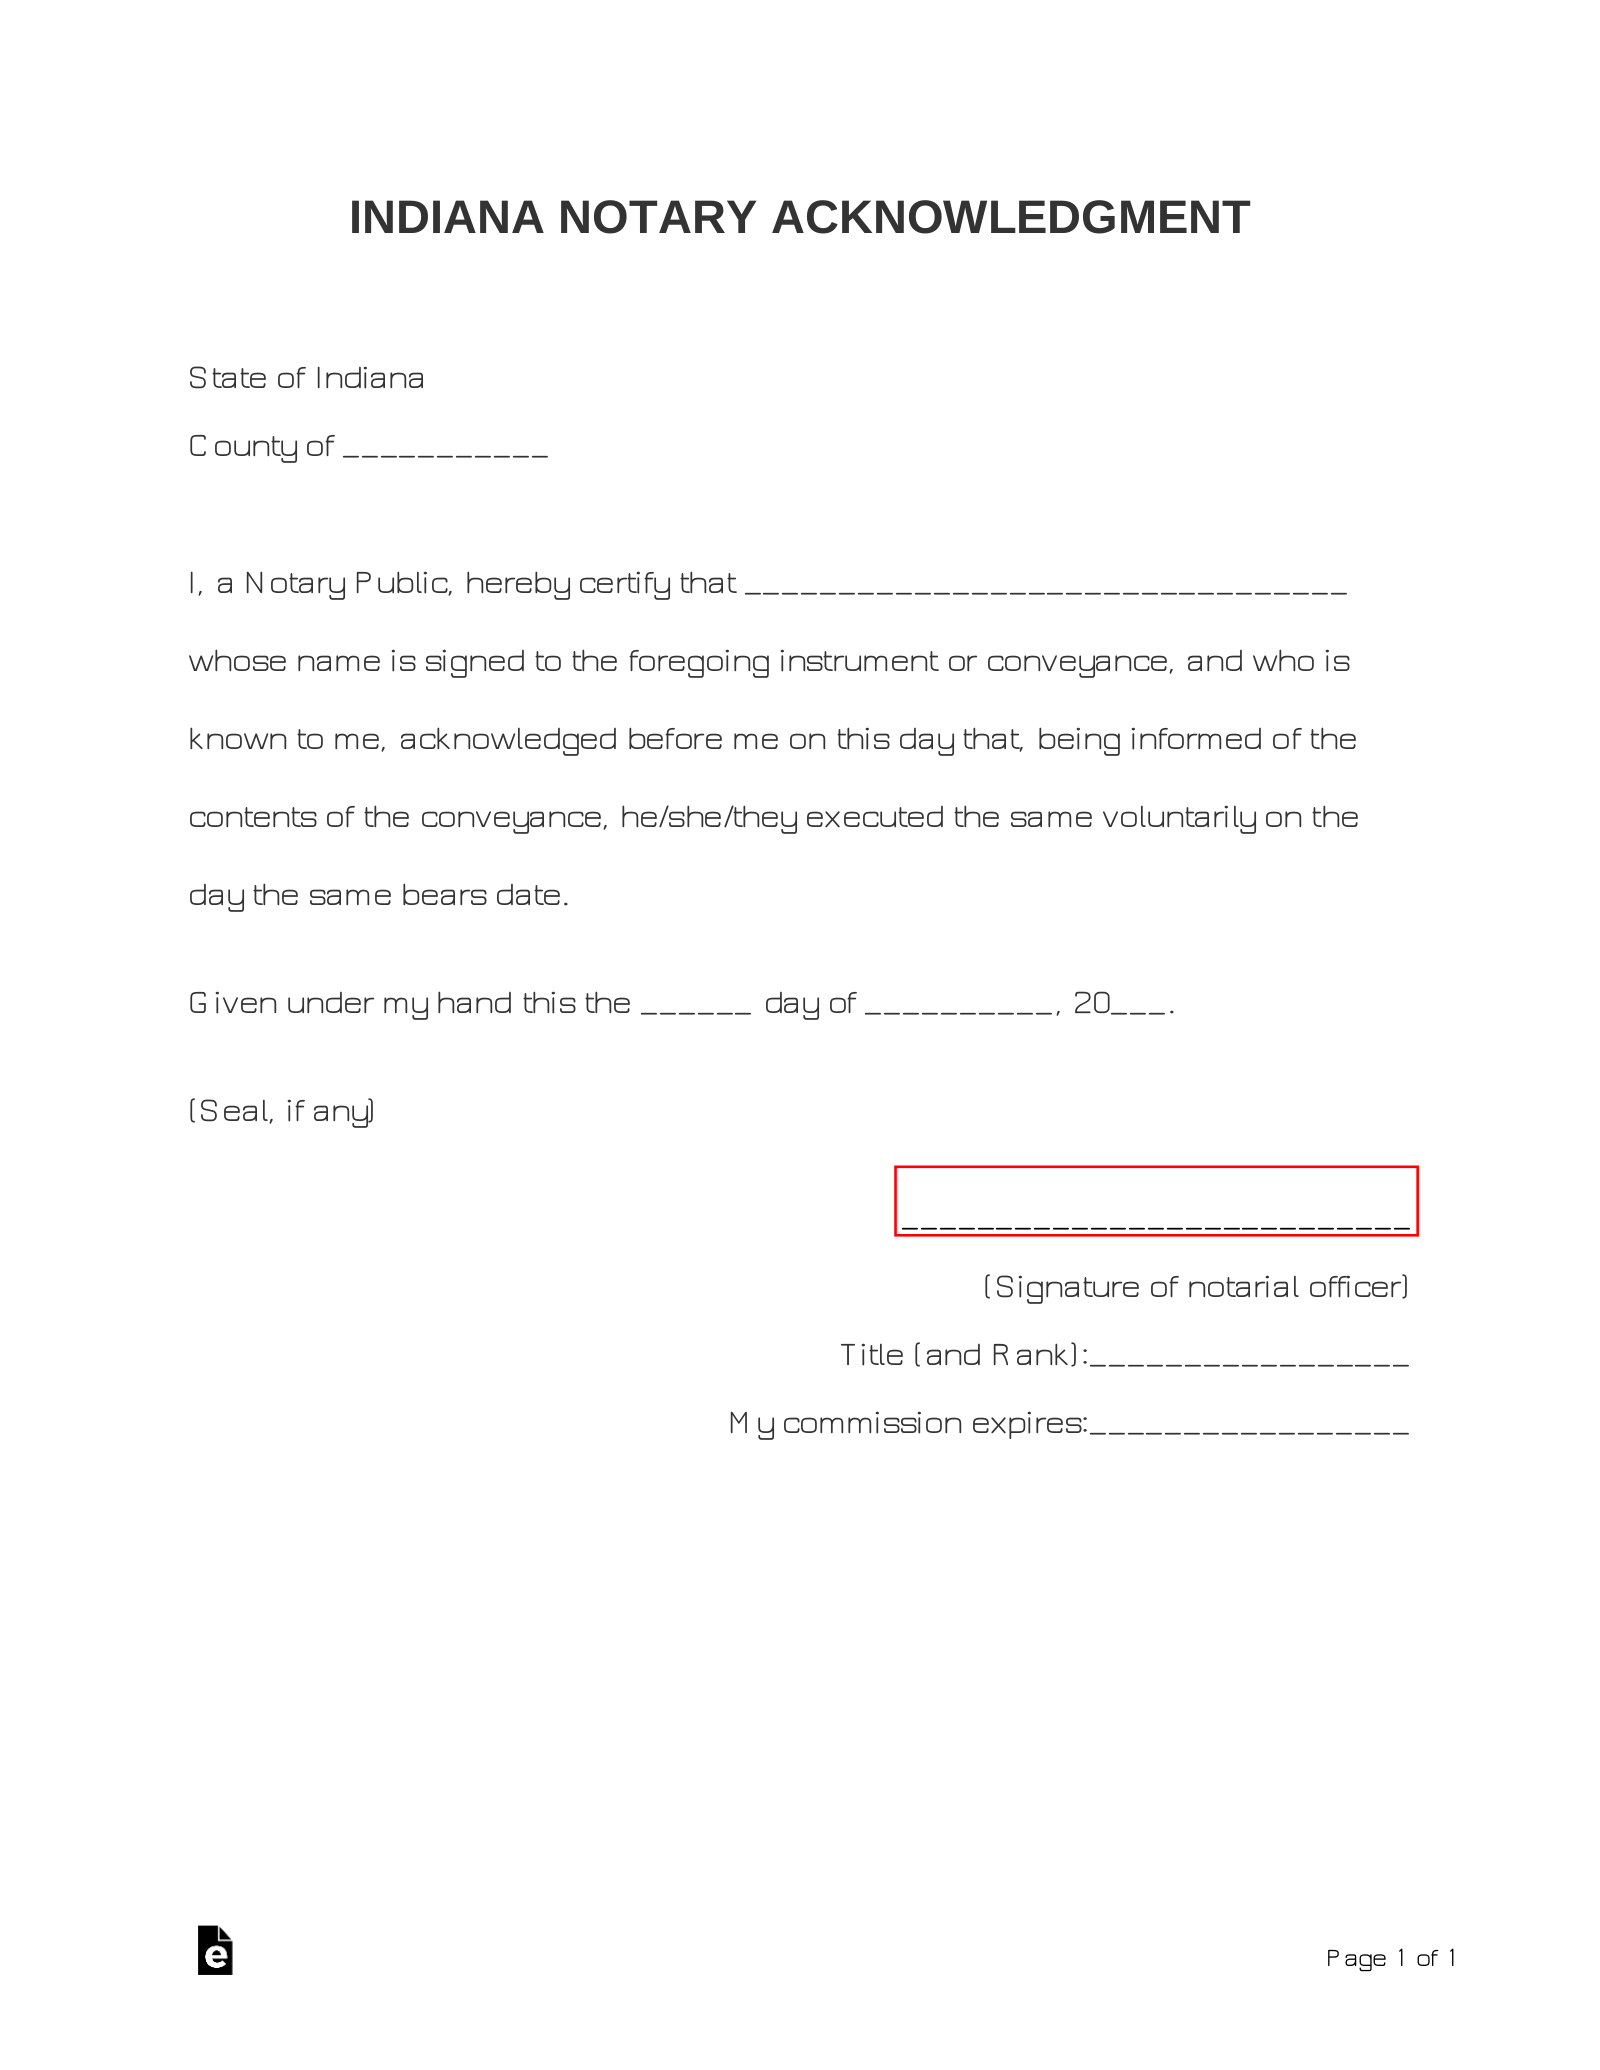 Indiana-Notary-Acknowledgment-Form.png